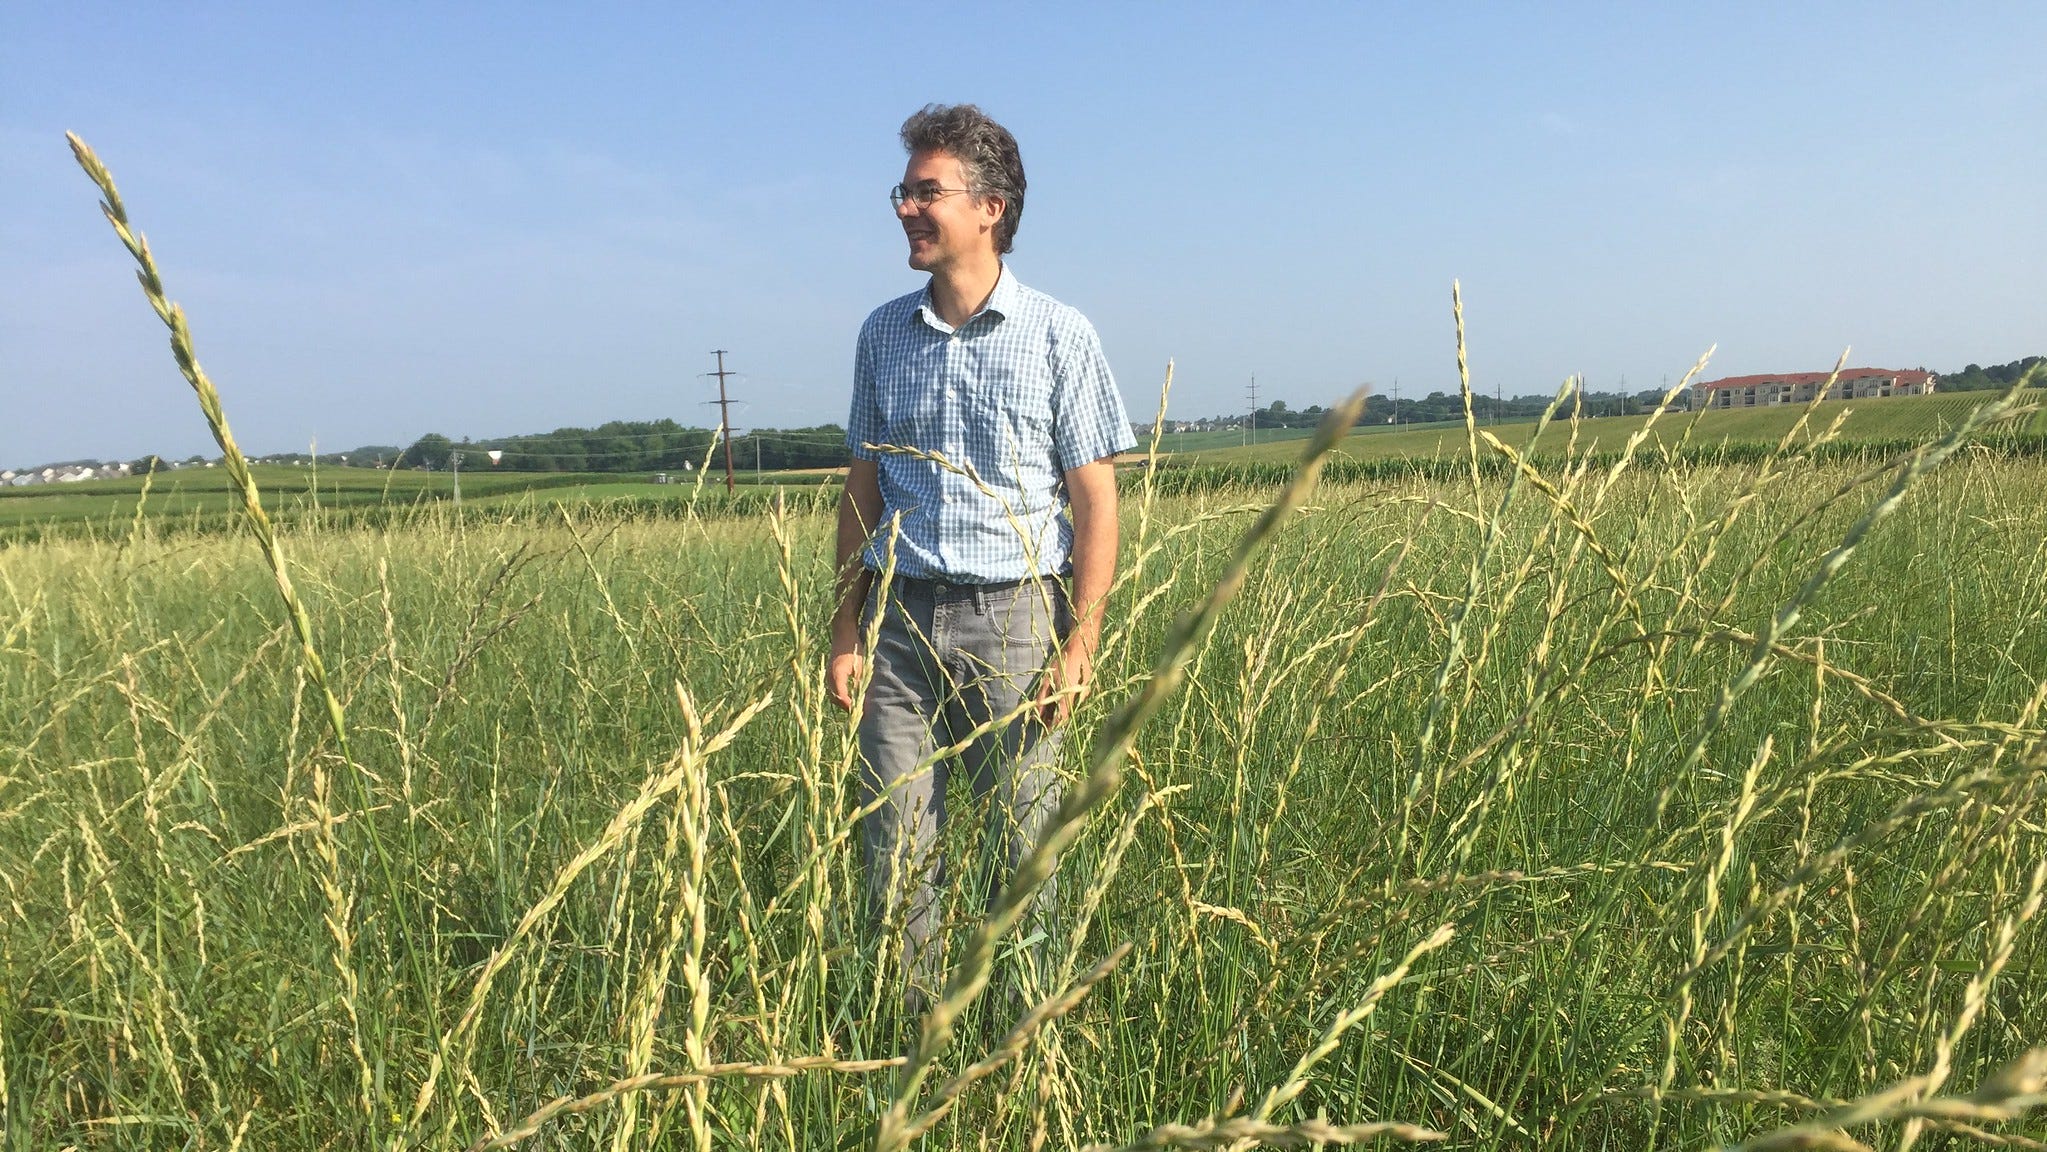 Coalition including UW-Madison aims to adopt first US perennial grain crop - Wisconsin State Farmer